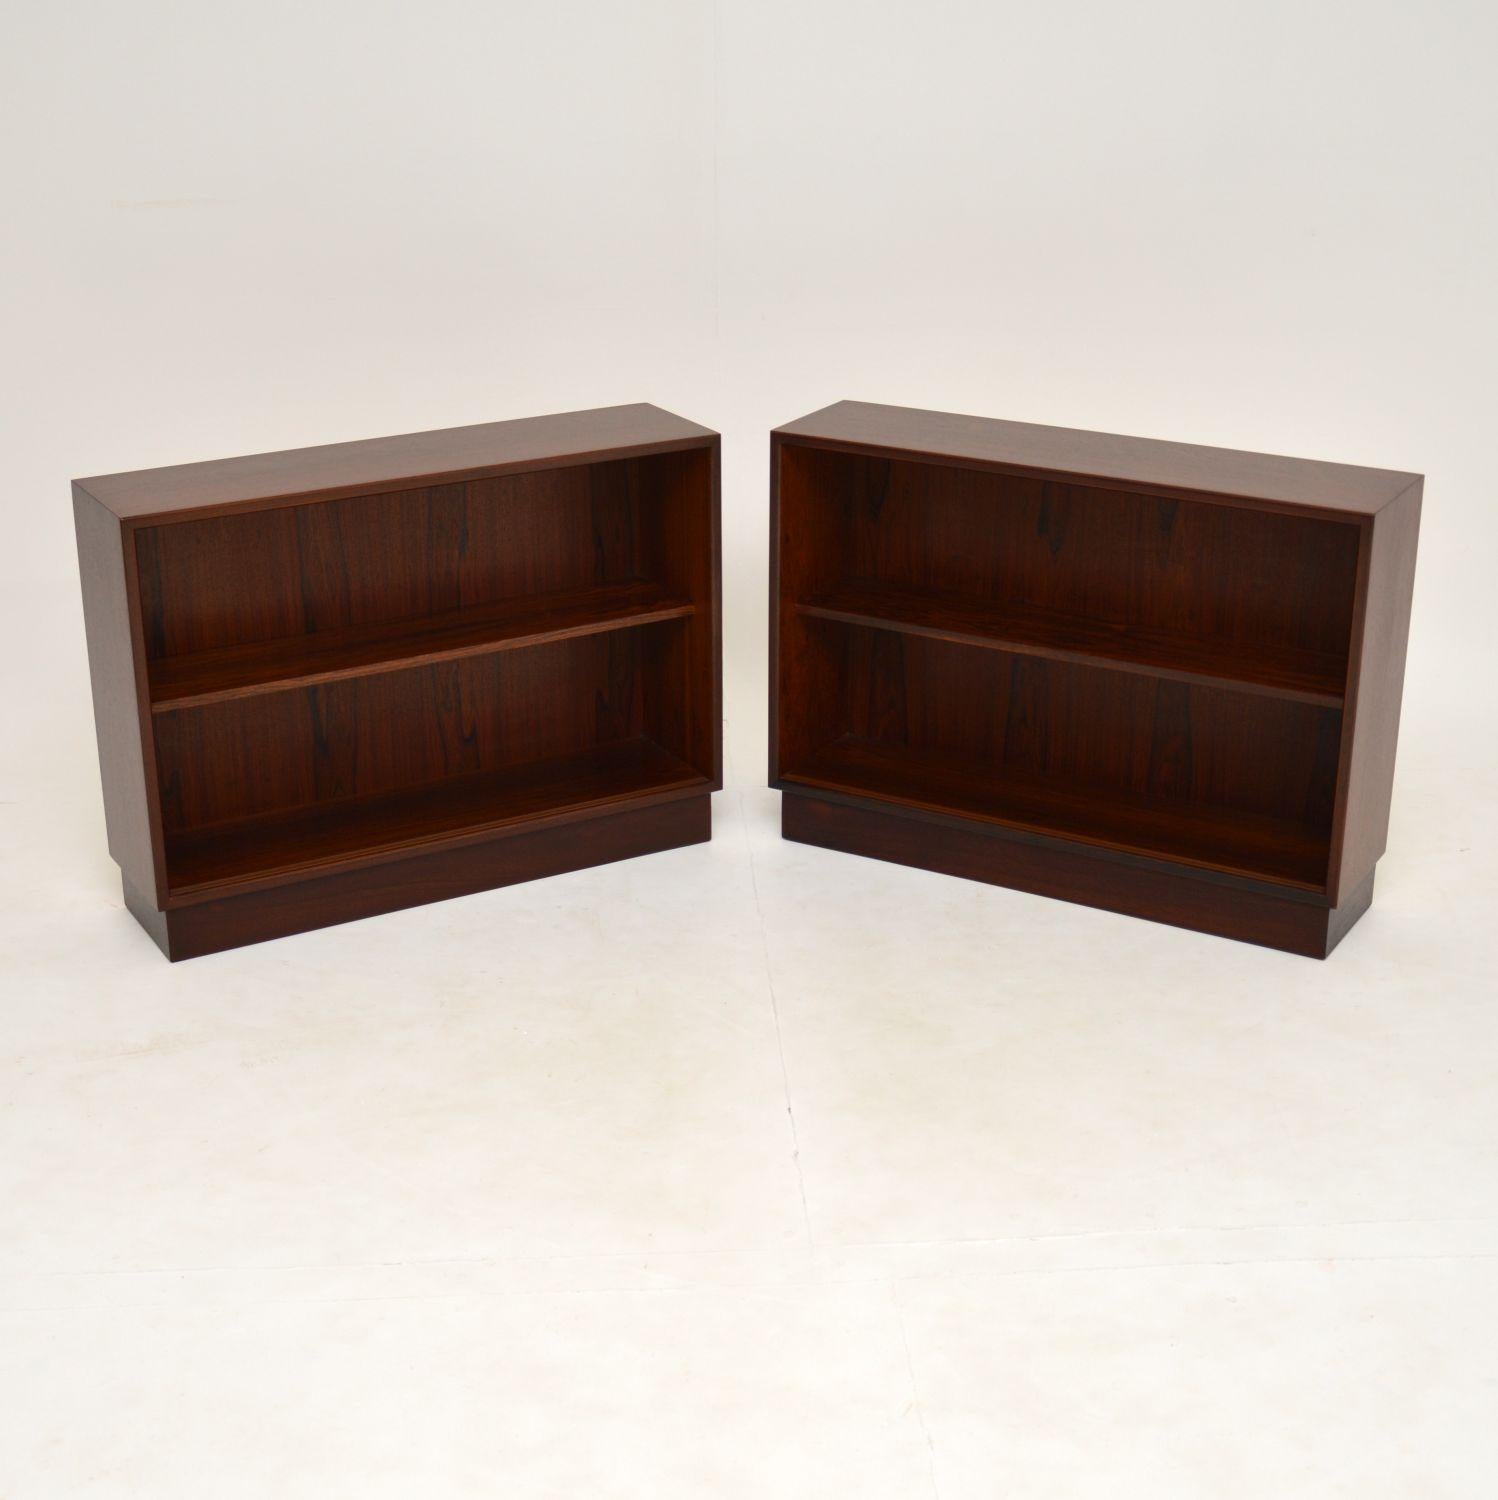 A stylish and useful pair of vintage open bookcases in wood. These were made in Denmark in the 1960’s by Randers Mobelfabrik, they were designed by Preben Sorensen.

They are of lovely quality, with beautiful rosewood all over, even on the inside.